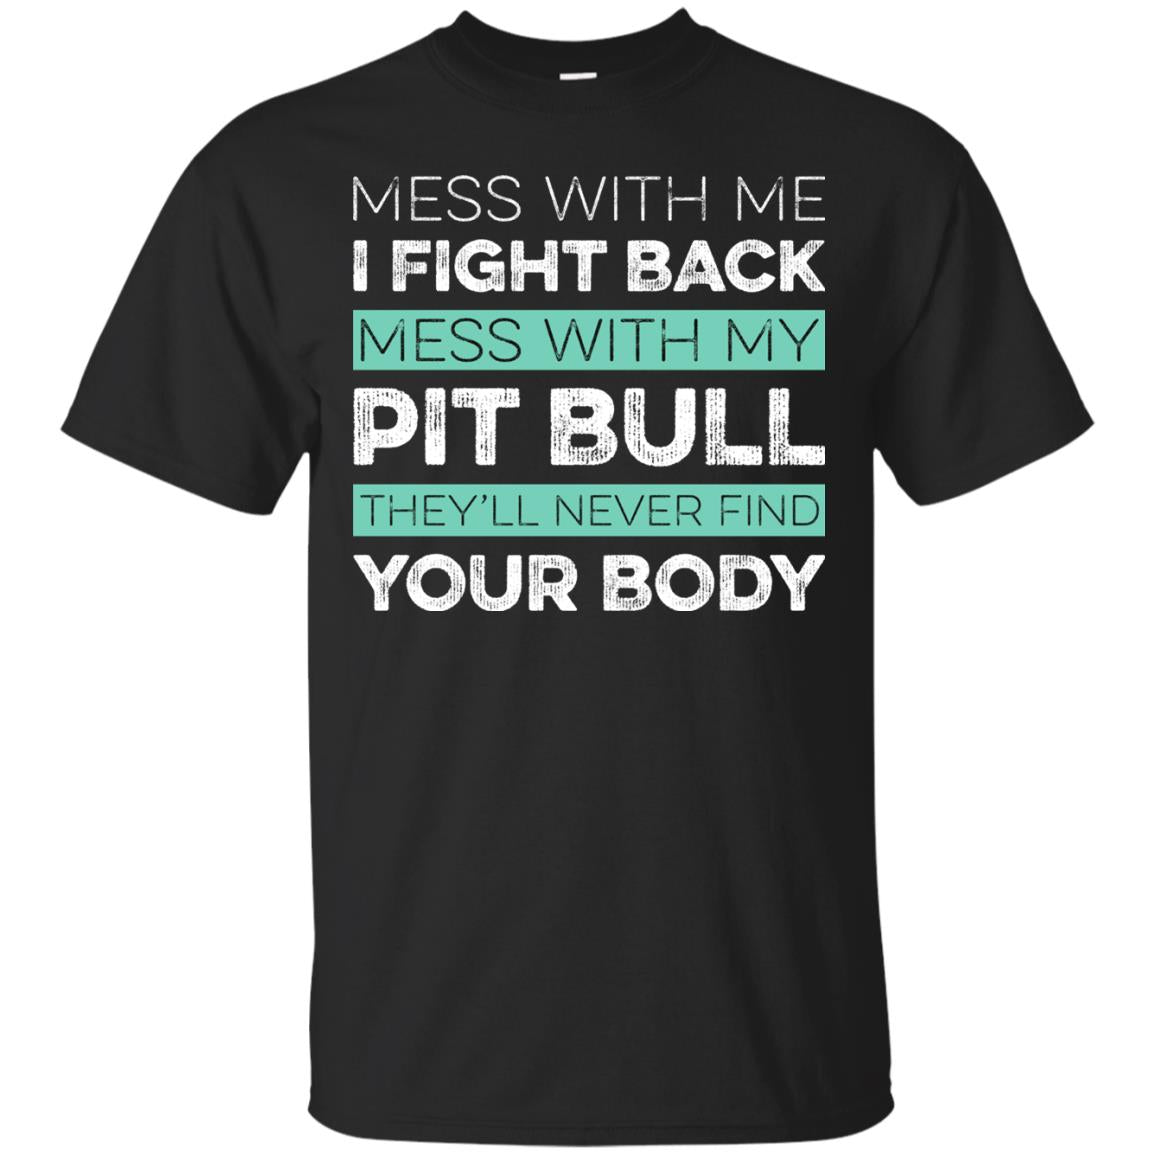 Mess With Me I Fight Back - Pitbull